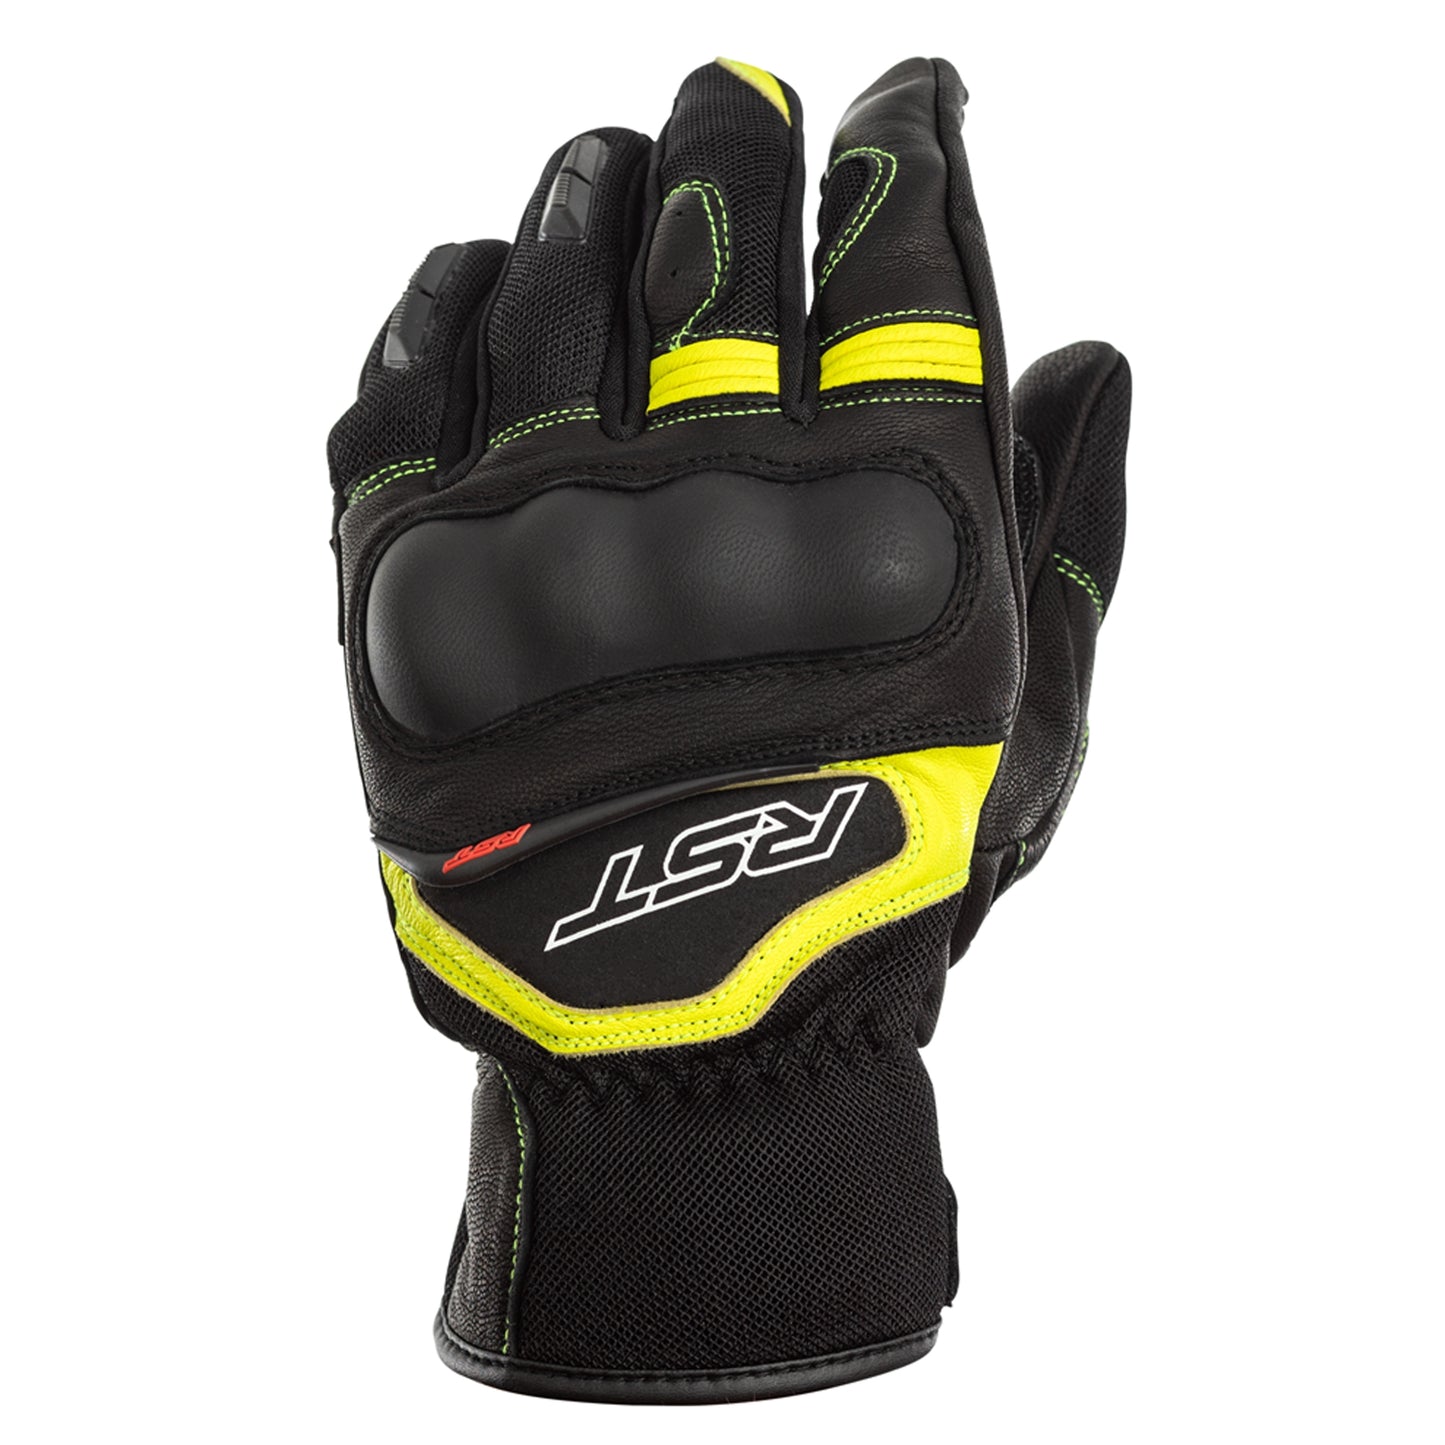 RST Urban Air 2 II Leather Riding Glove - CE Approved - Flo Yellow